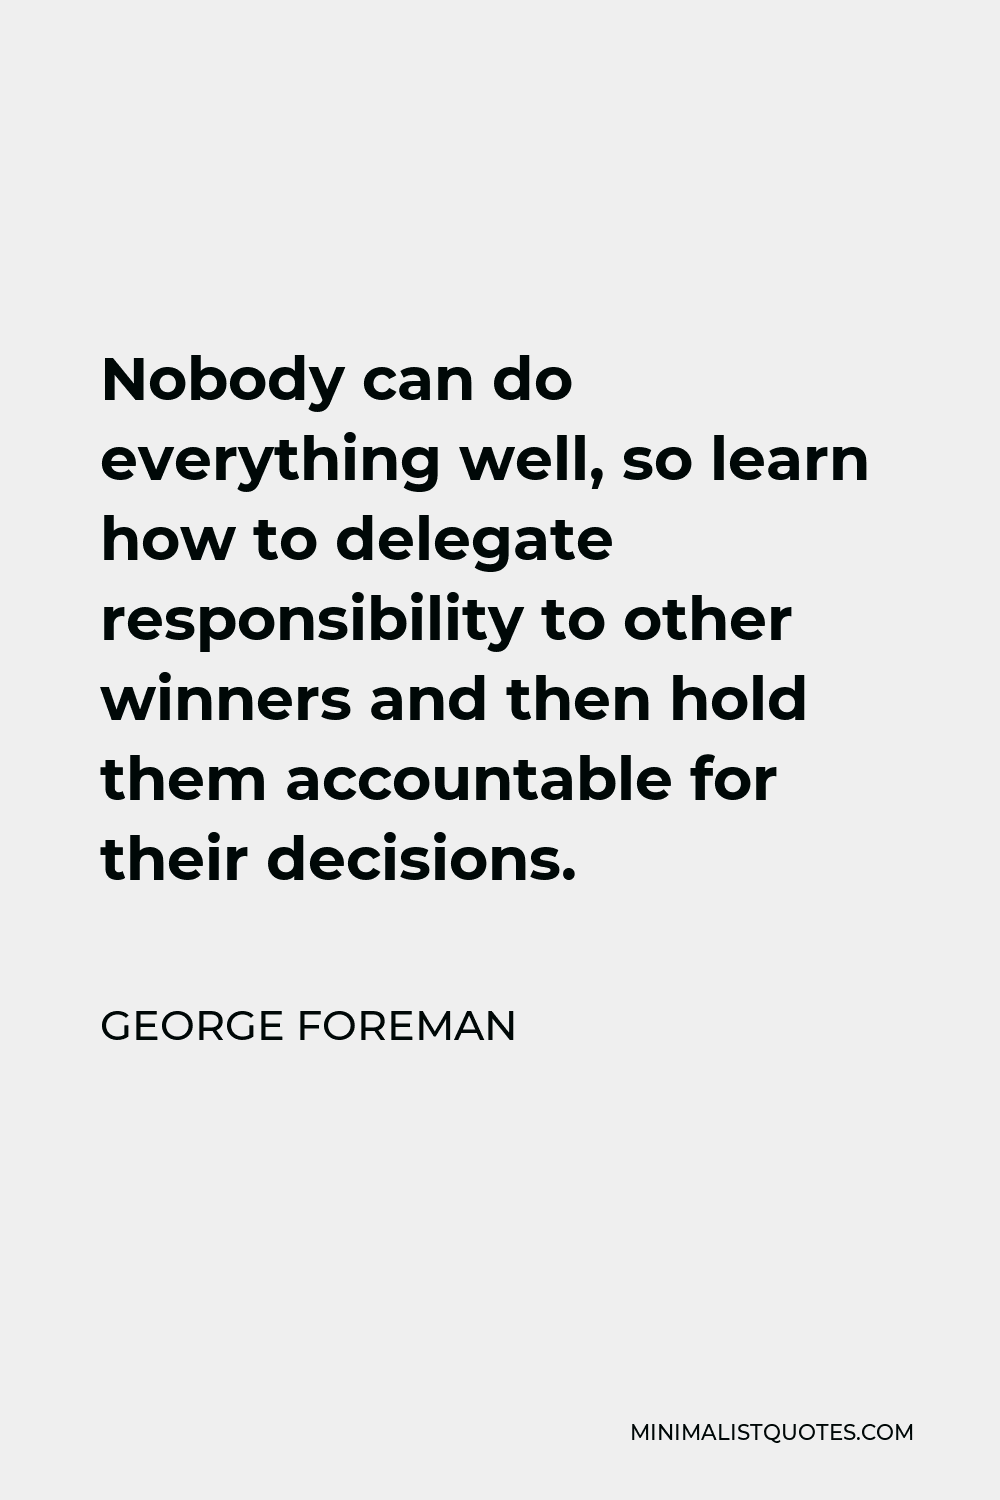 George Foreman Quote - Nobody can do everything well, so learn how to delegate responsibility to other winners and then hold them accountable for their decisions.